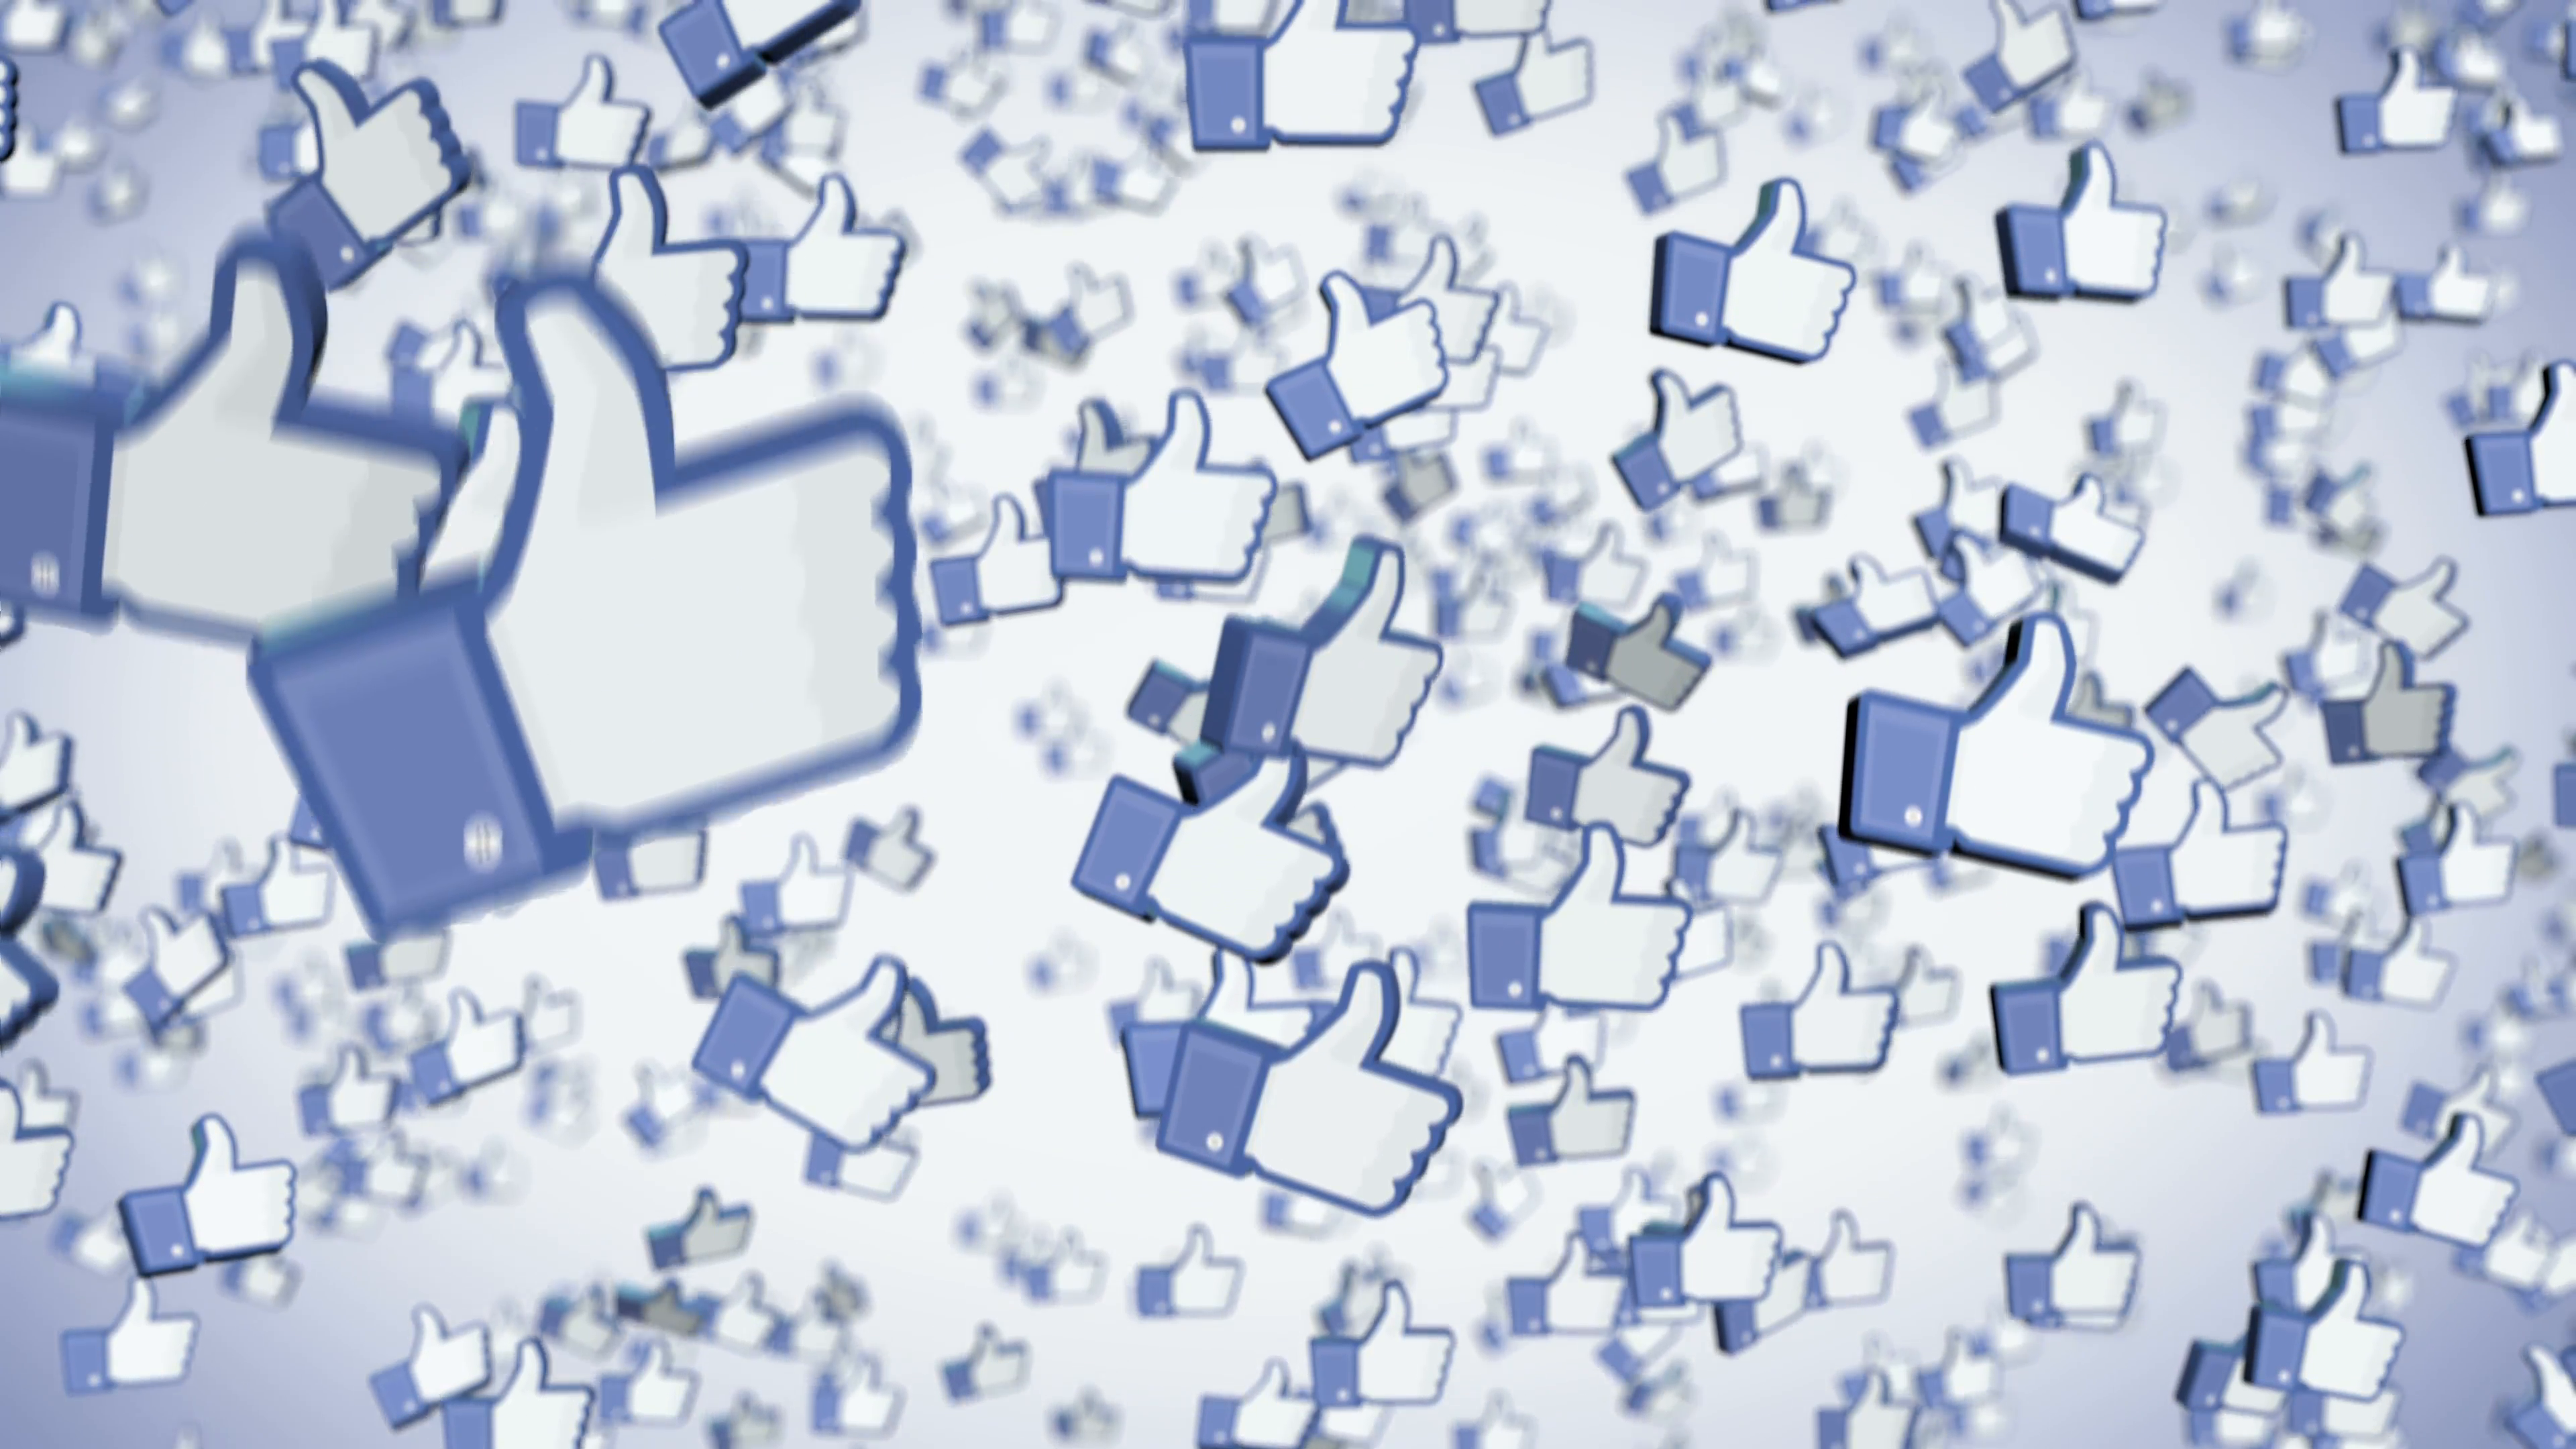 Here’s why you should stay away from fake likes on Facebook